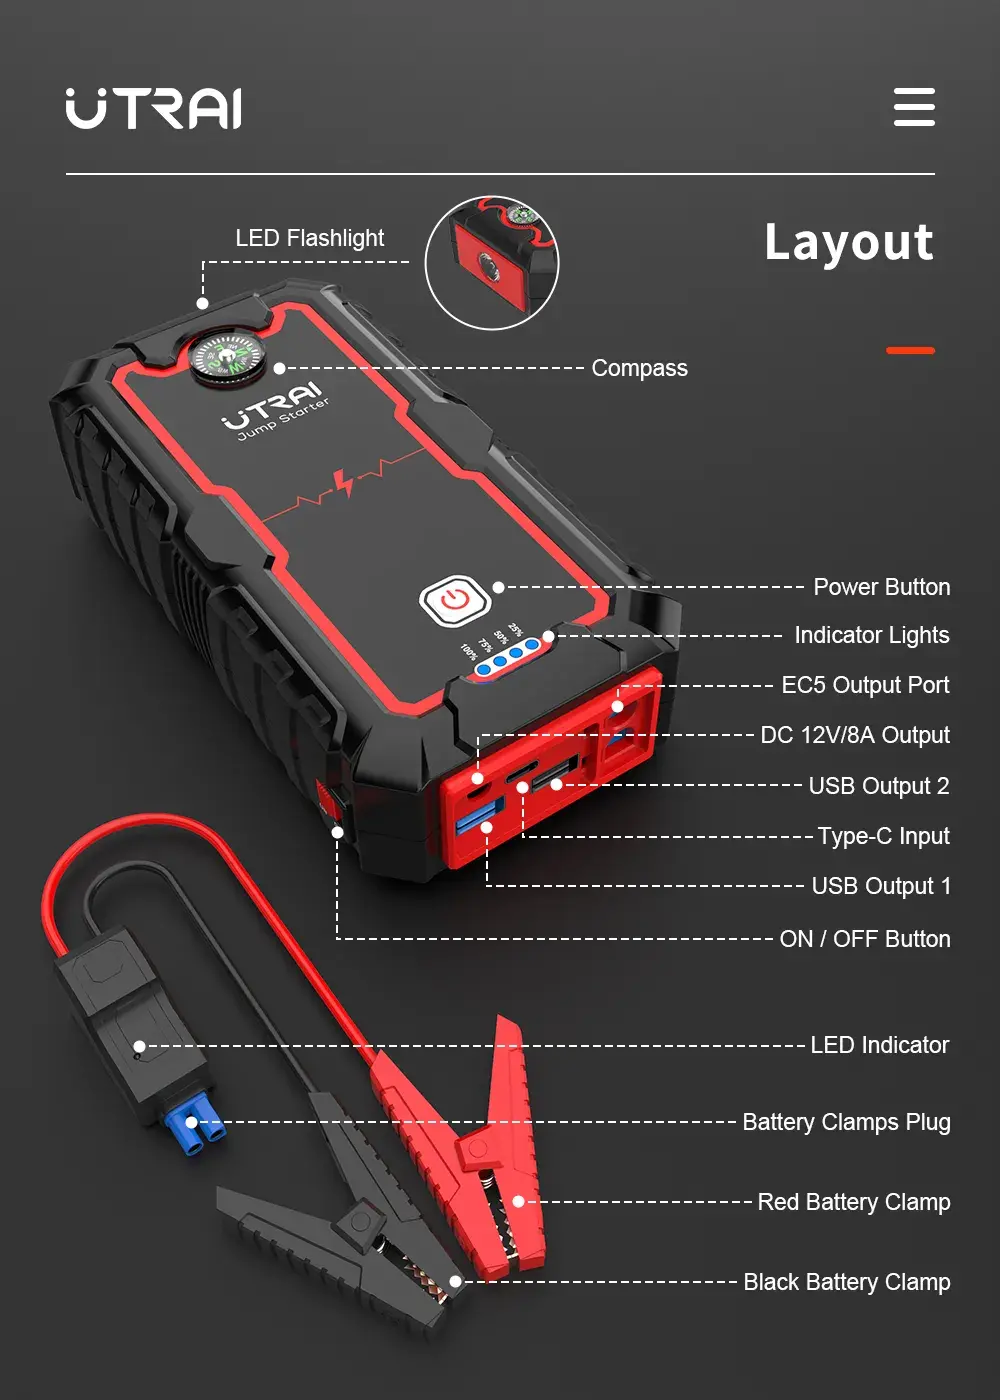 UTRAI 2000A Jump Starter Power Bank Portable Charger Starting Device For 8.0L/6.0L Emergency Car Battery Jump Starter